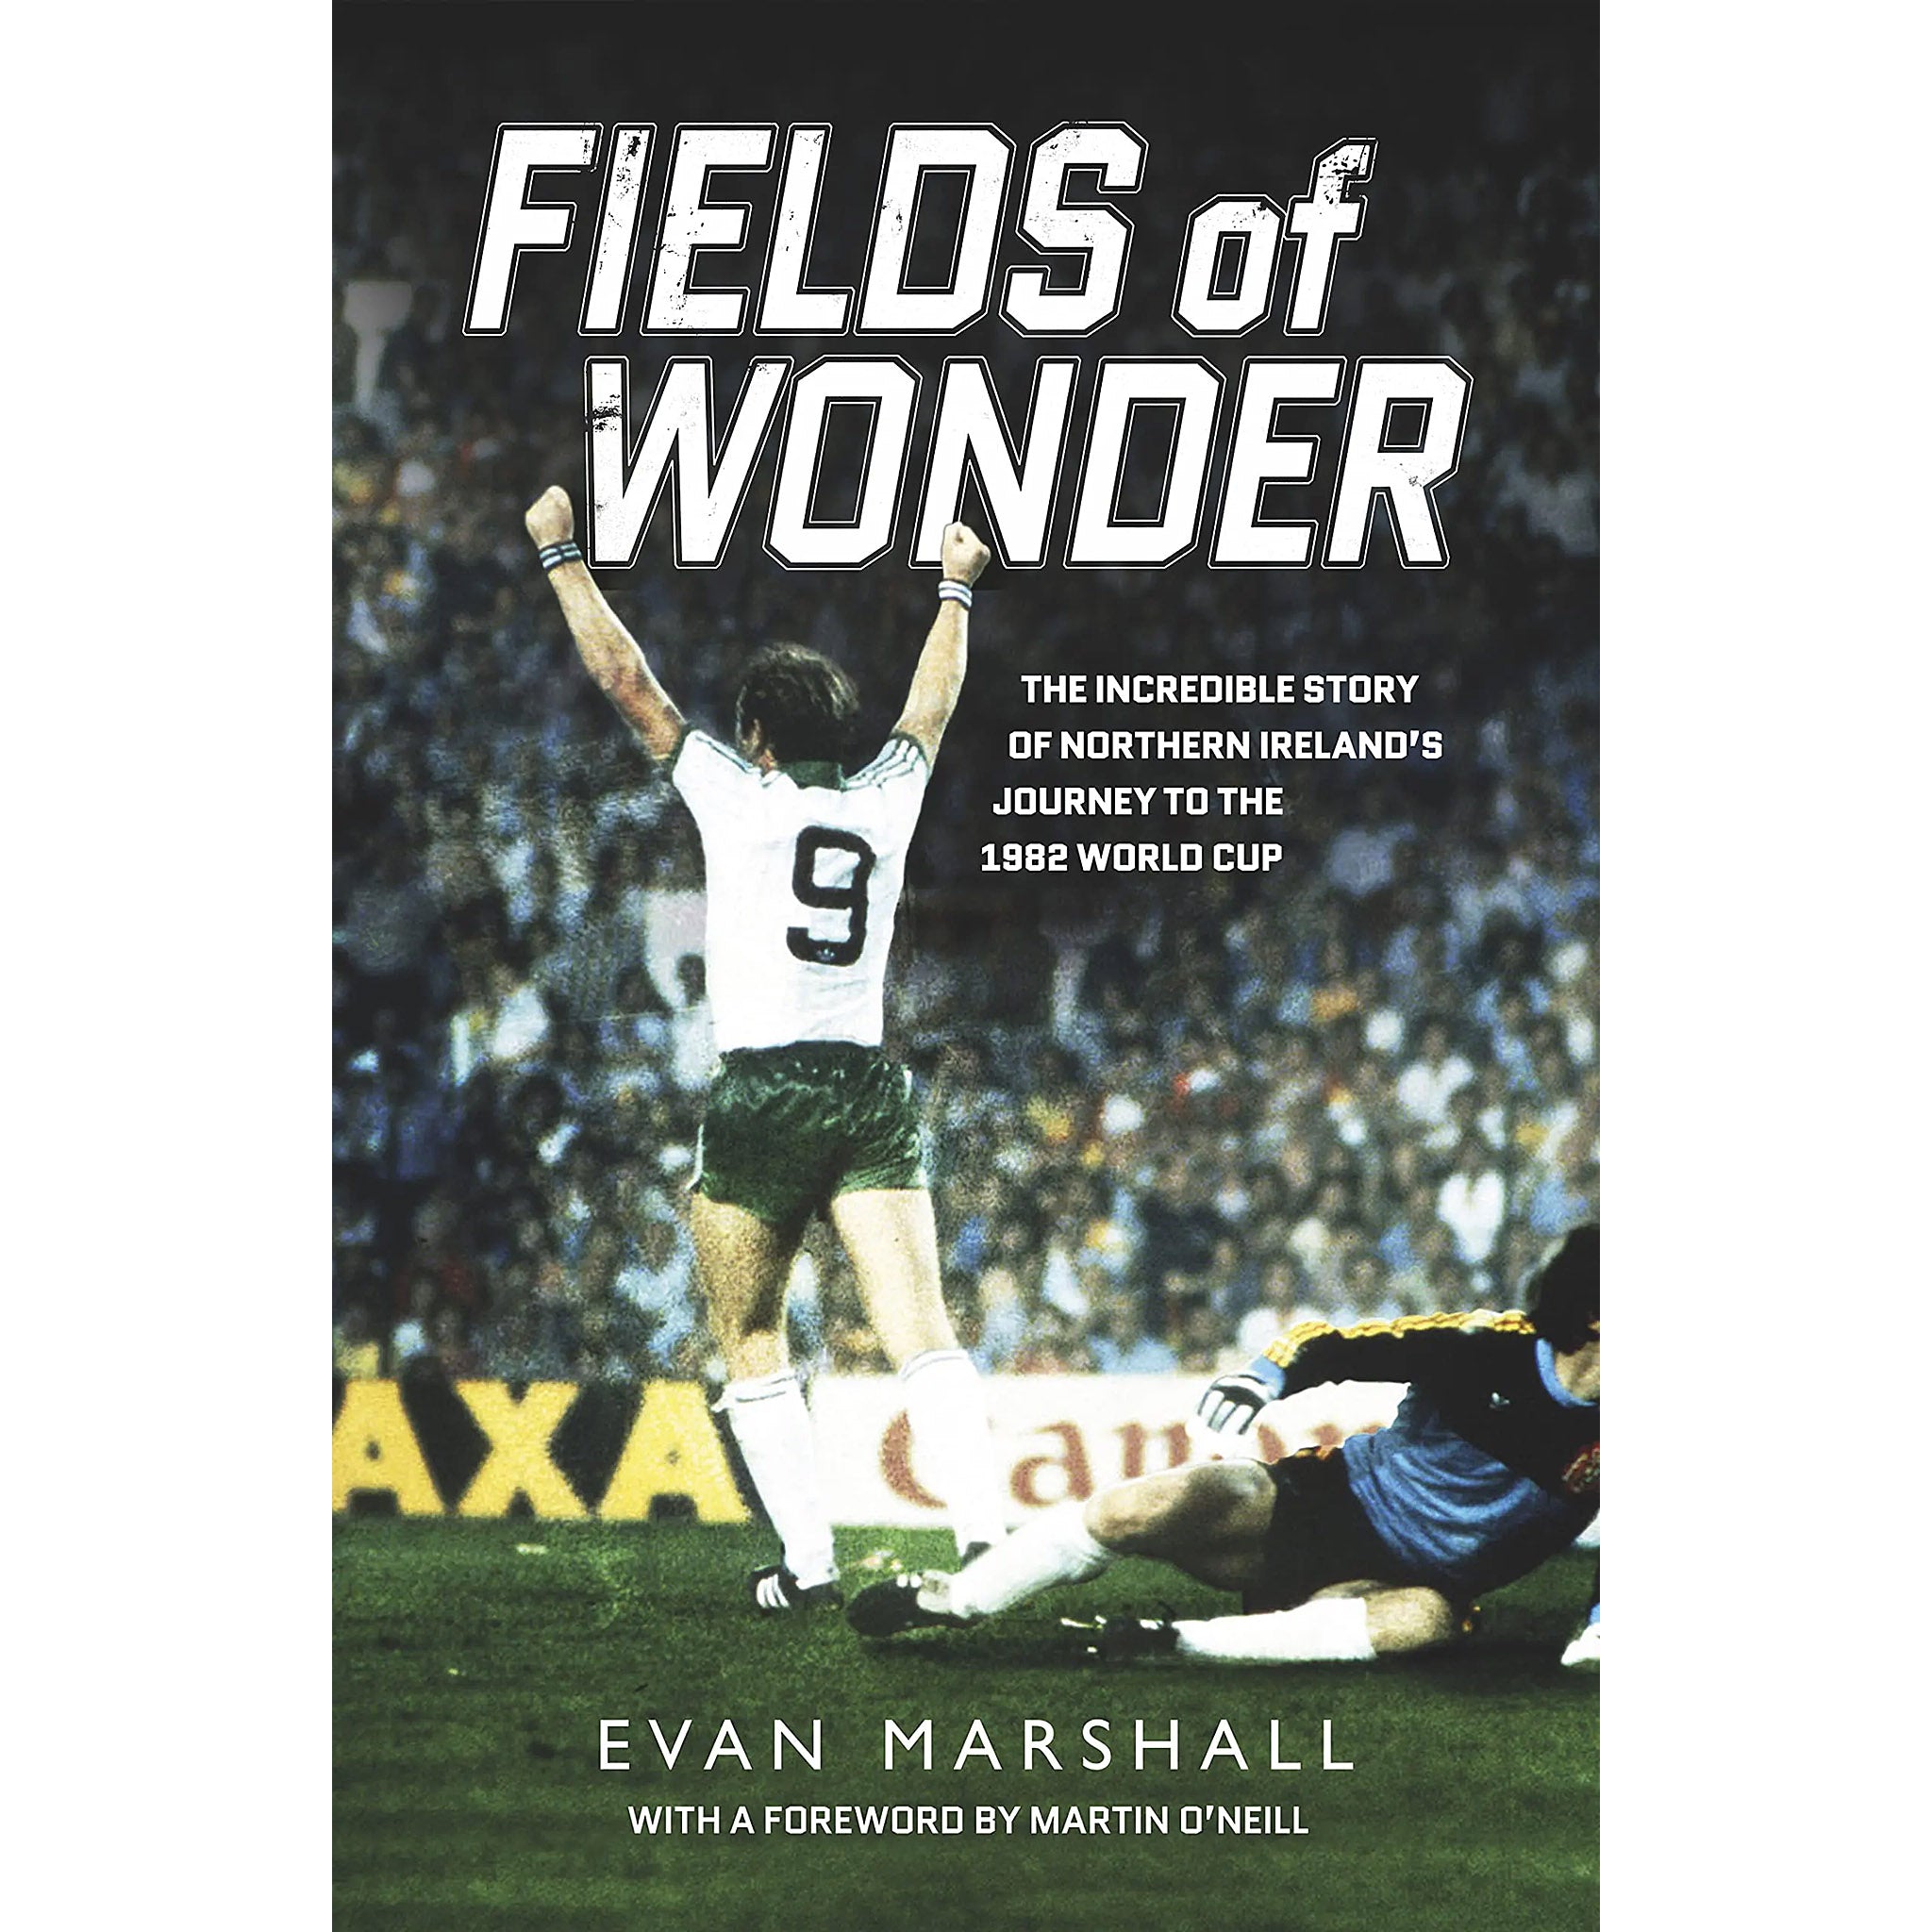 Fields of Wonder – The Incredible Story of Northern Ireland's Journey to the 1982 World Cup